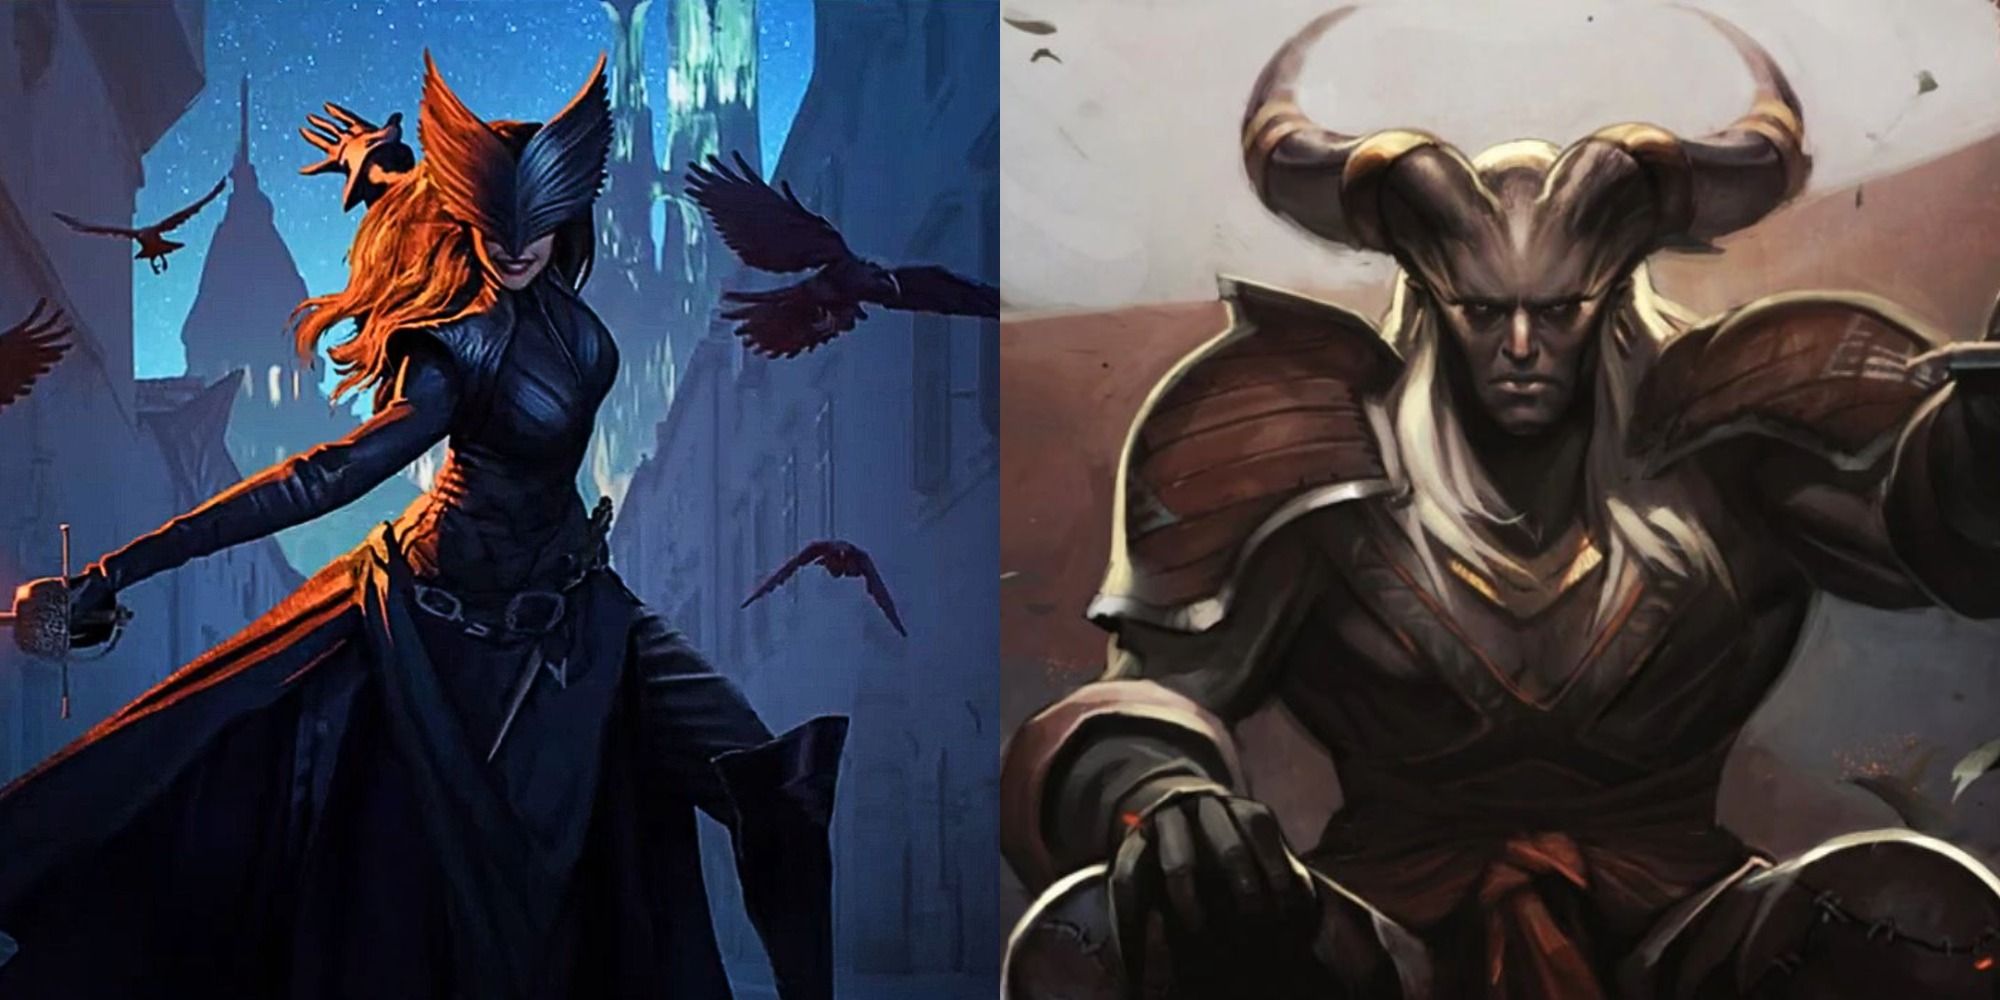 Split image showing a character from Dragon Age 4 and a Qunari